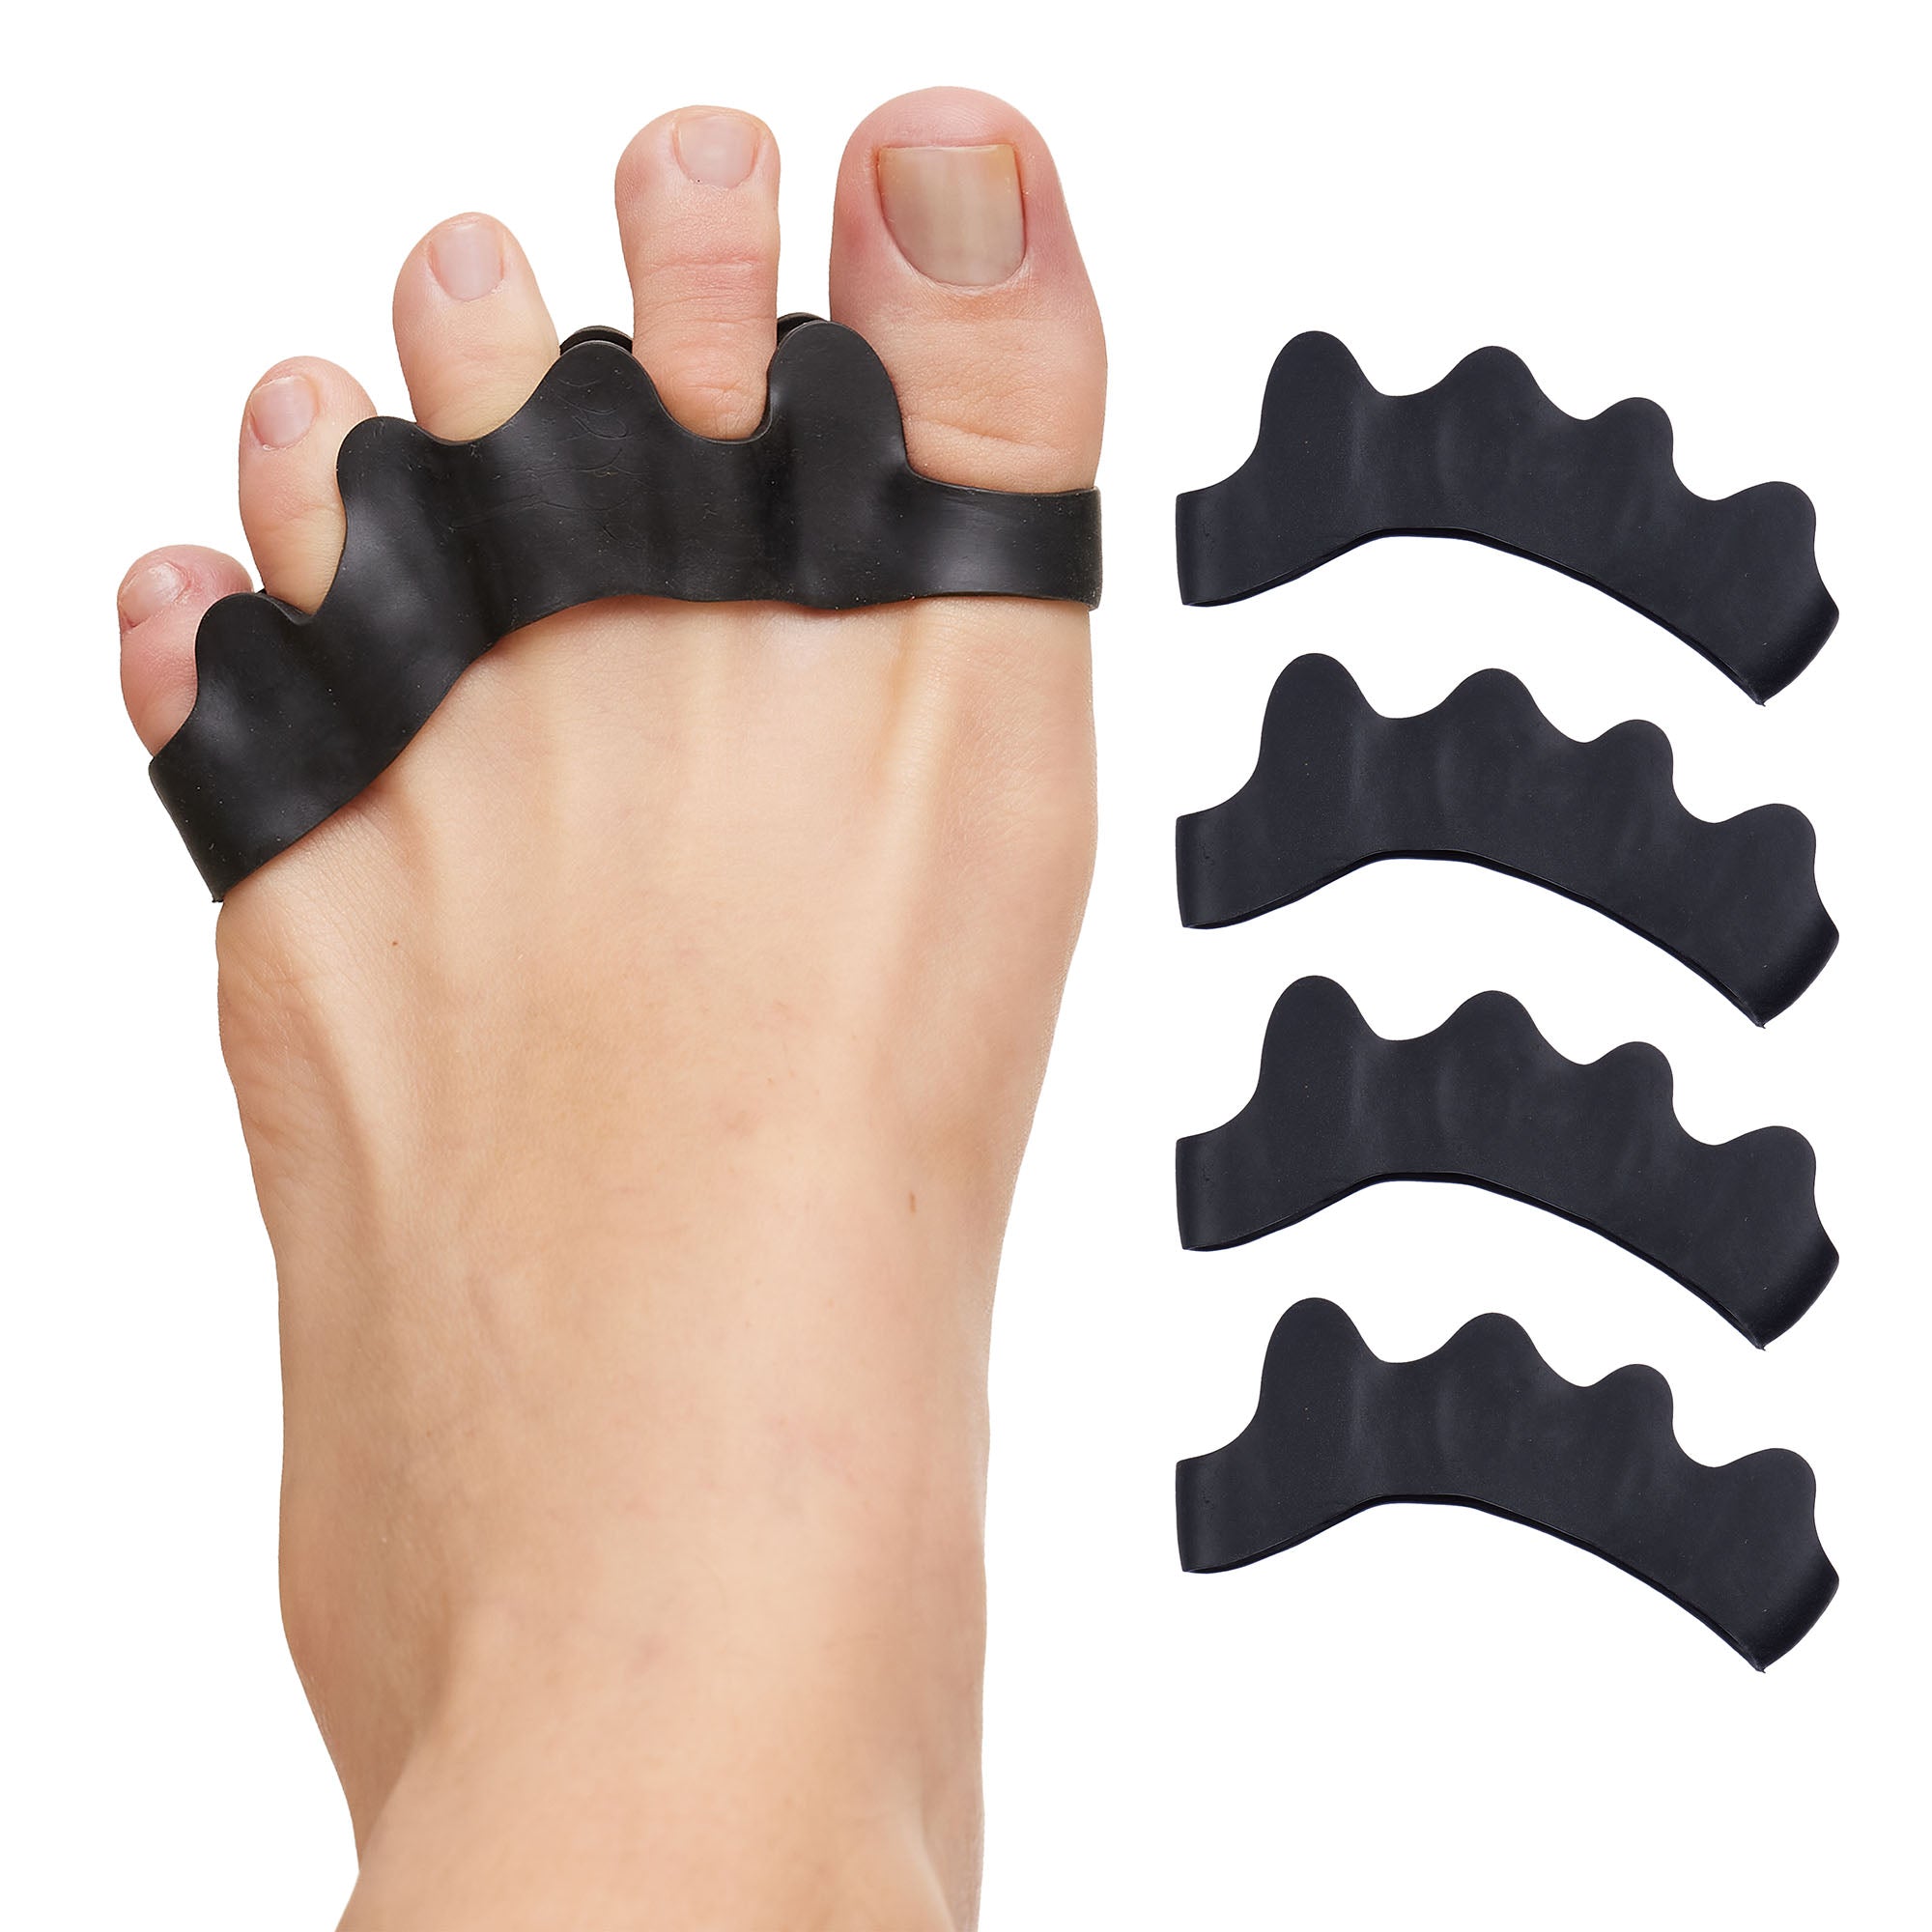 Silicone Toe Spacers for Correct Toe Alignment - 2 Pairs – ZenToes